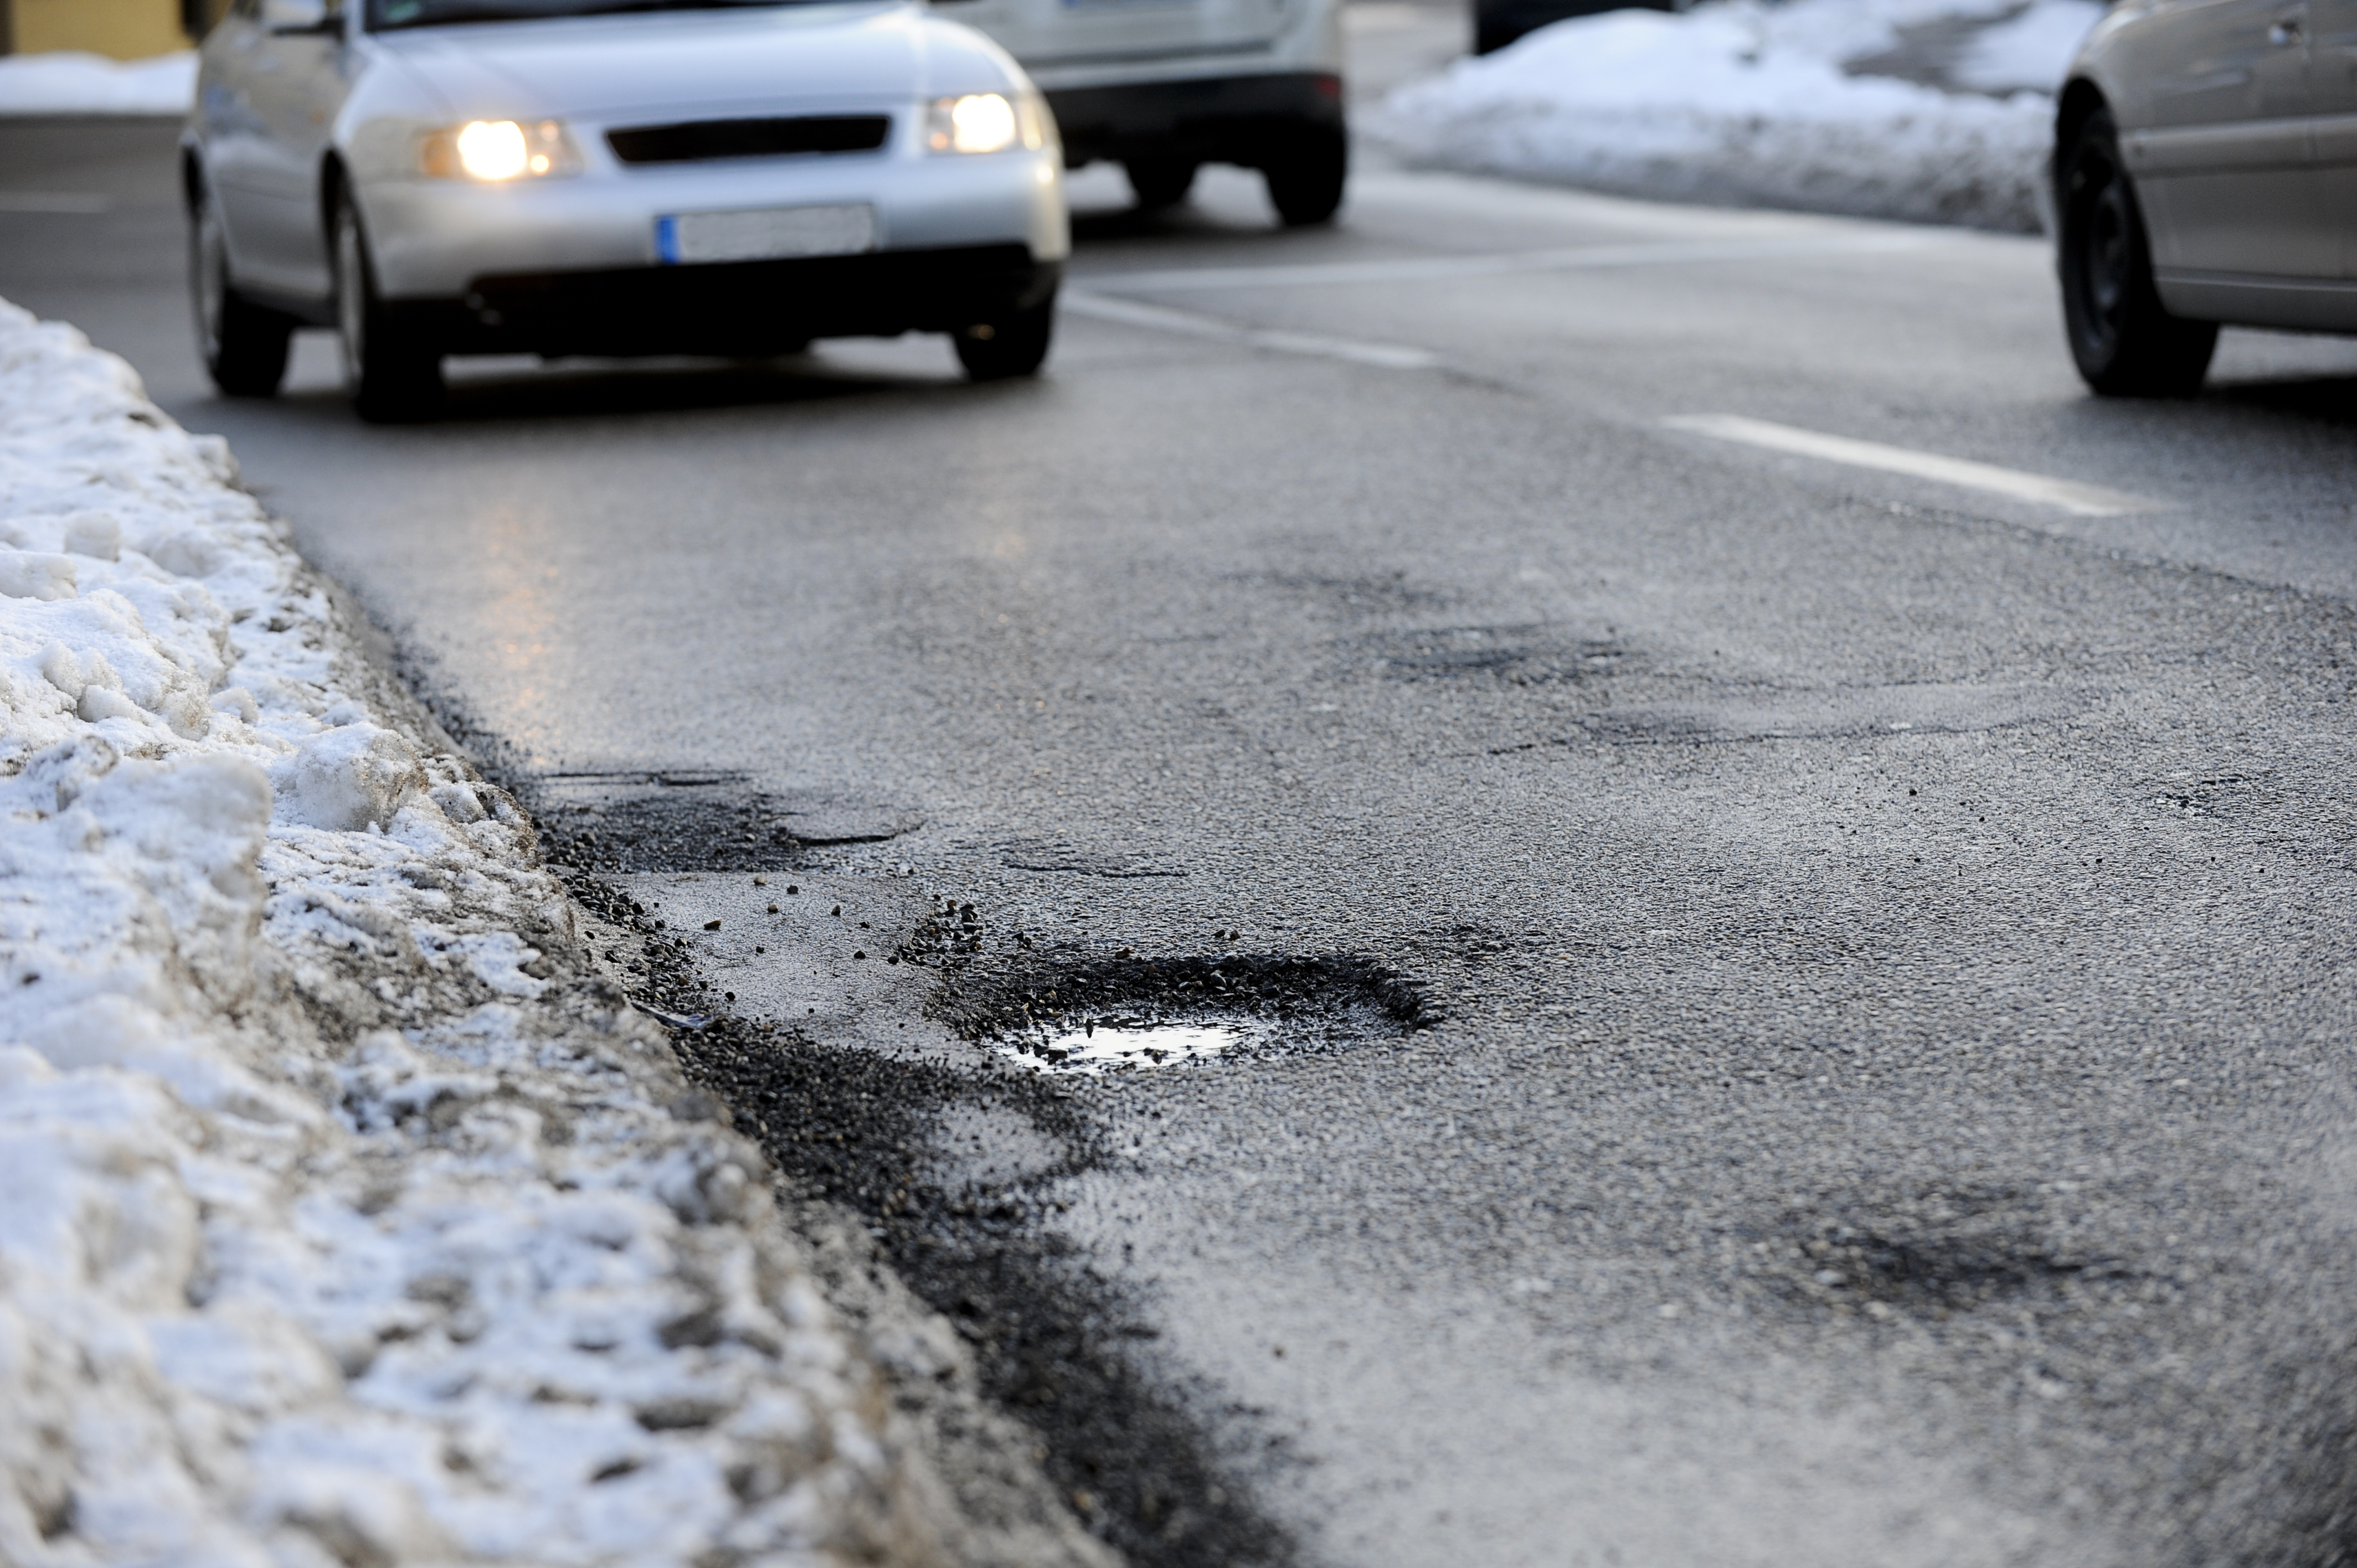 pothole caused by icy weather conditions